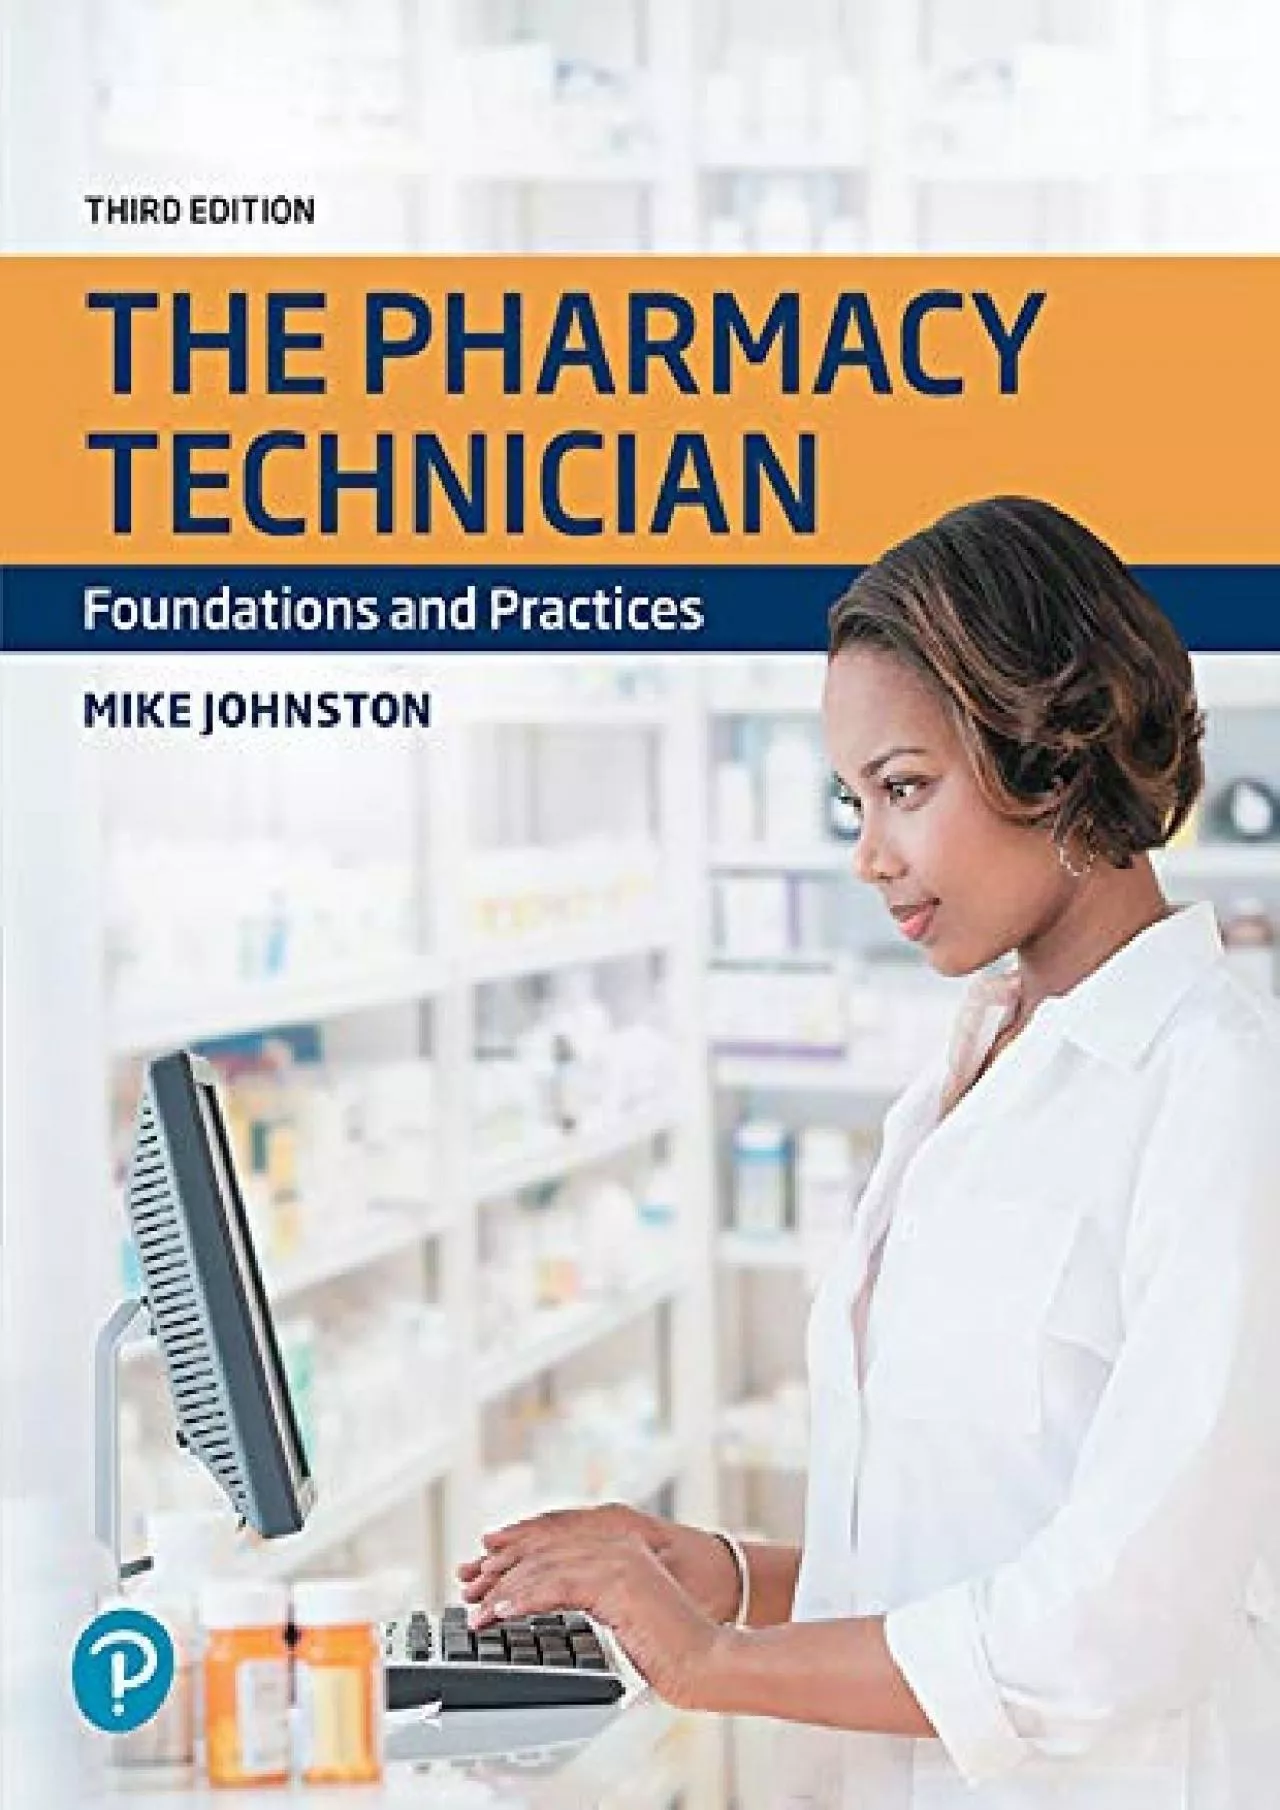 (EBOOK)-The Pharmacy Technician: Foundations and Practices (2-downloads)